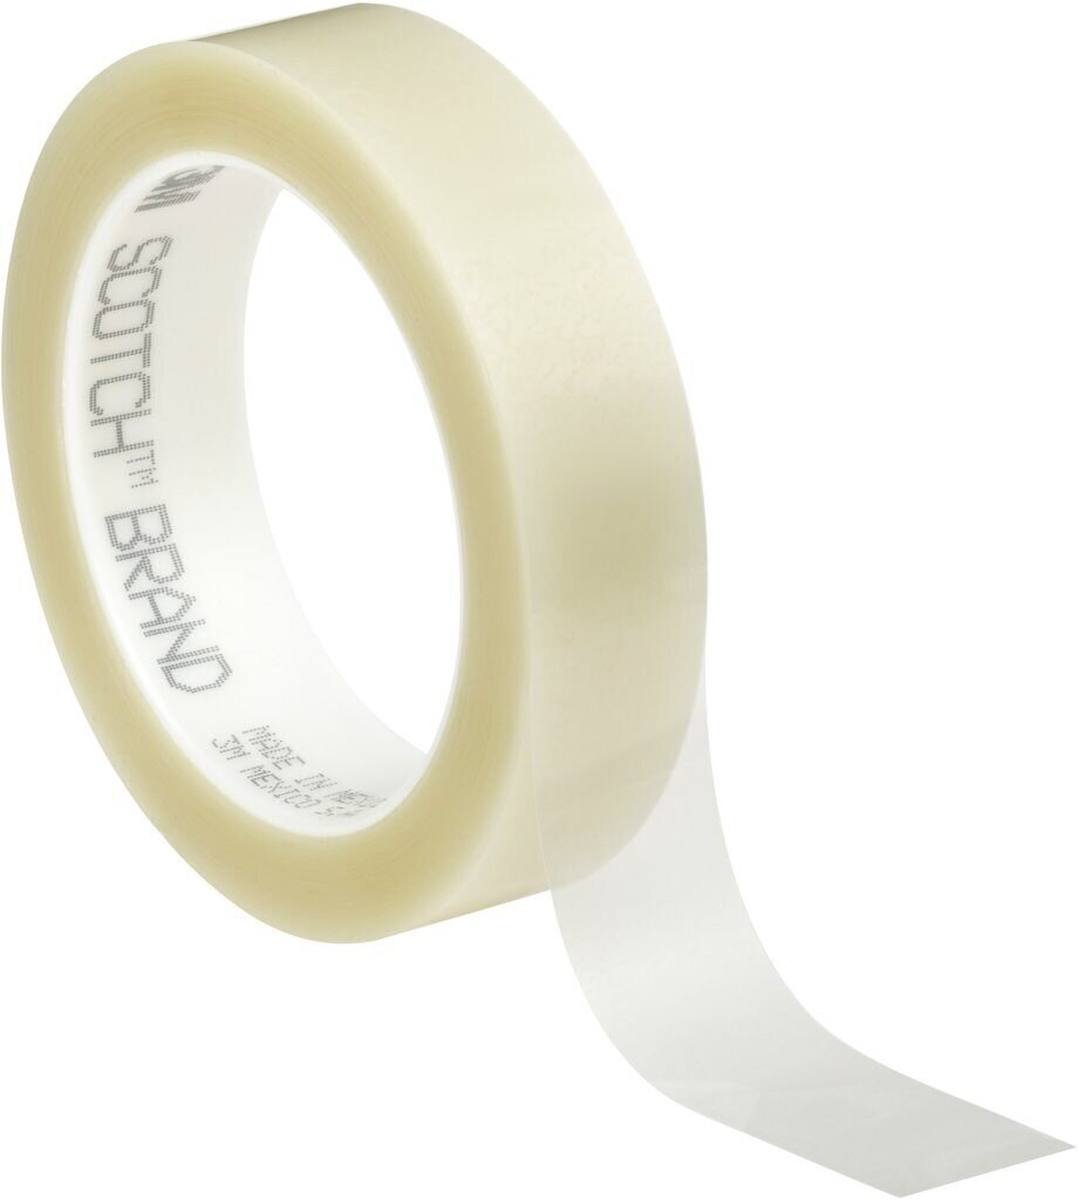 3M Polyester adhesive tape 853, transparent, 12 mm x 66 m, 0.06 mm